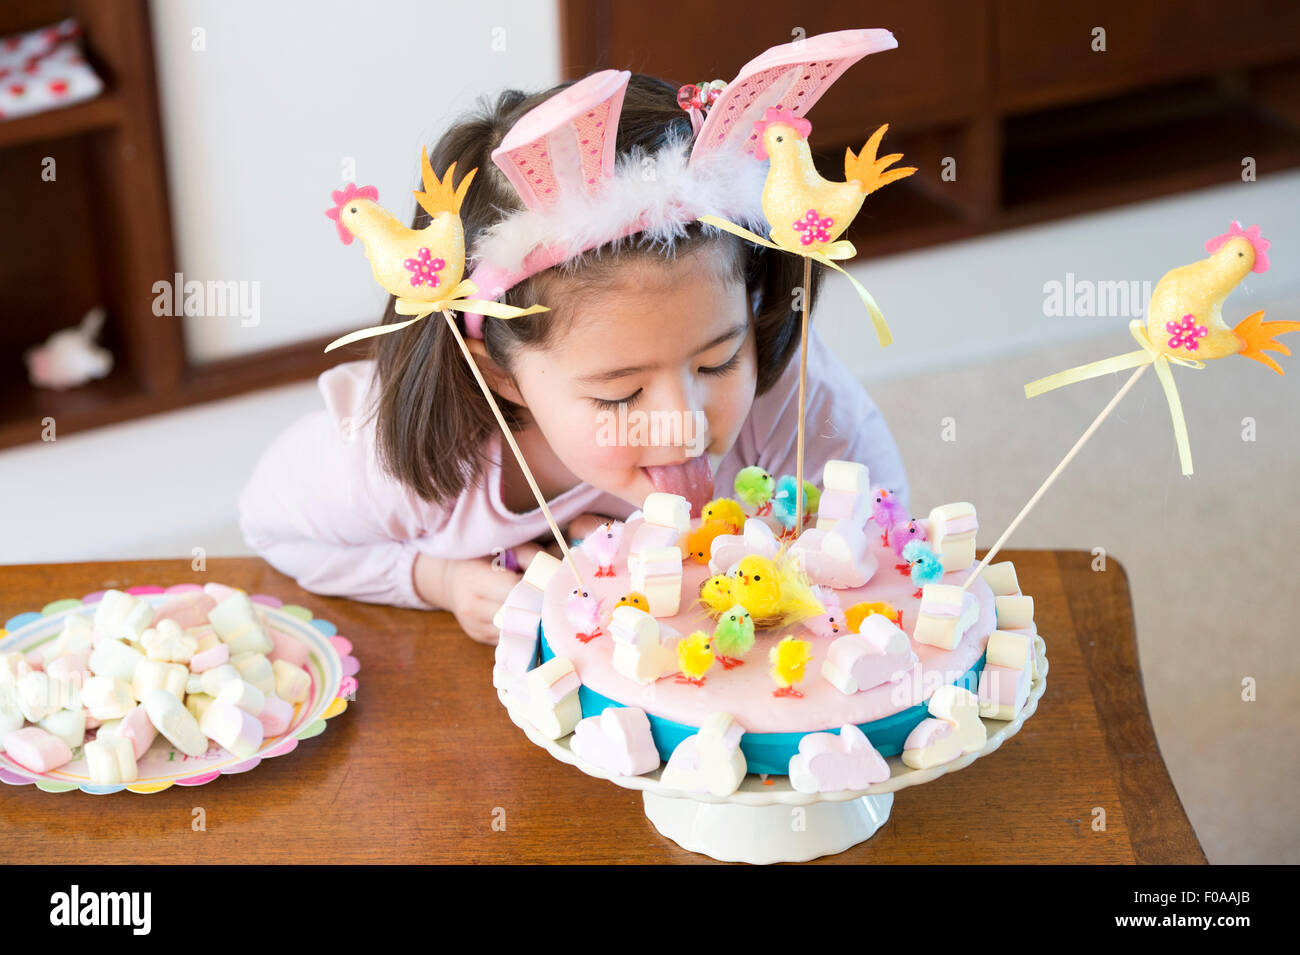 Young girl licking cake on table Stock Photo